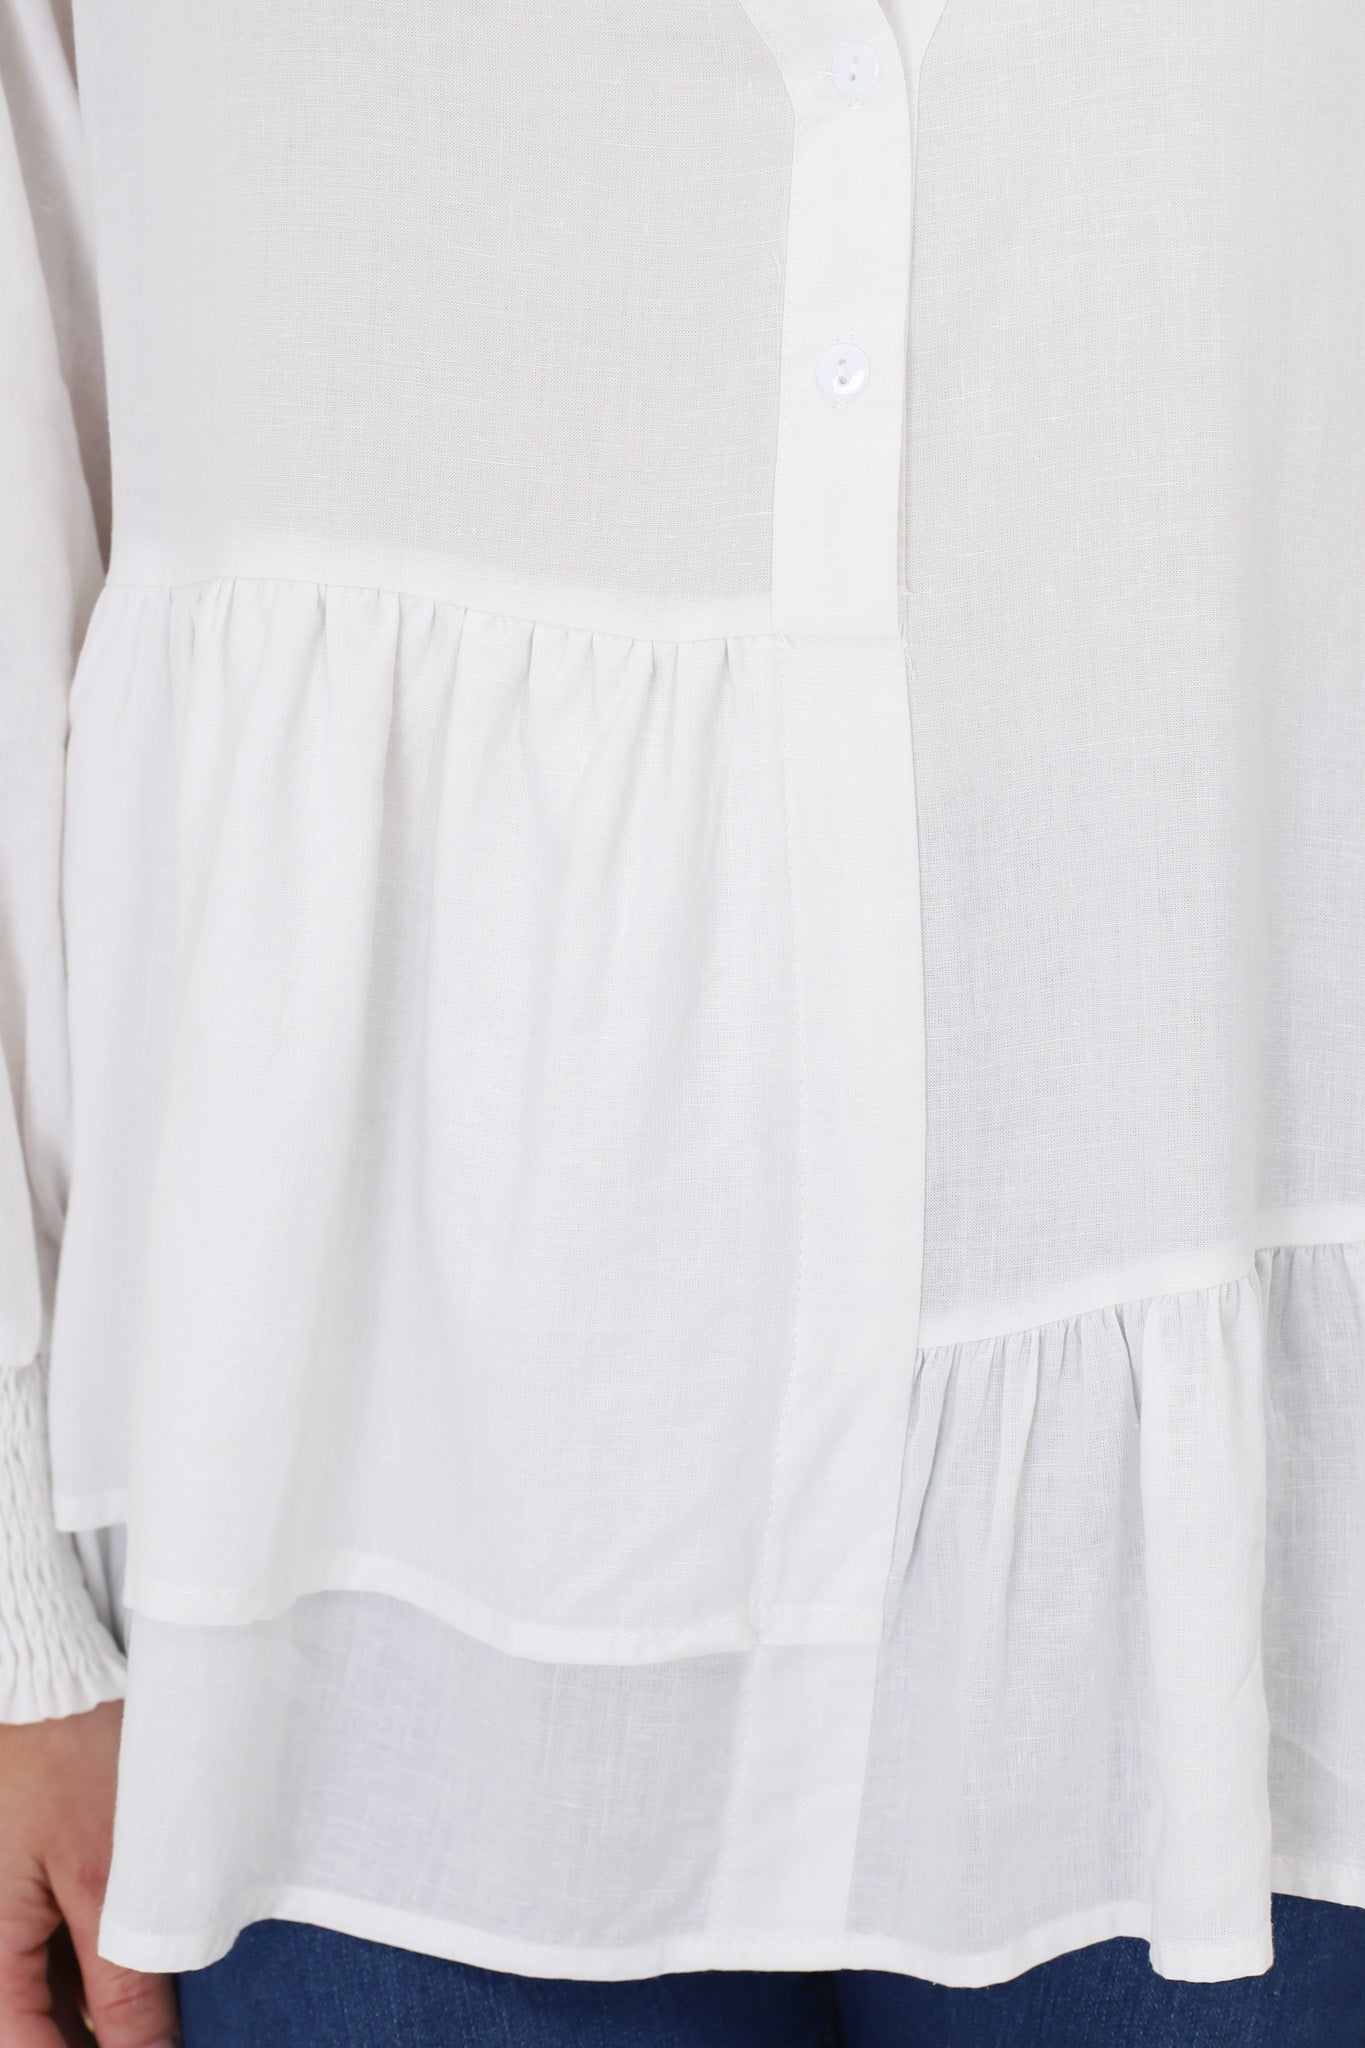 Nell Linen Top - A-Symmetric Detailed Button Down Shirt in White